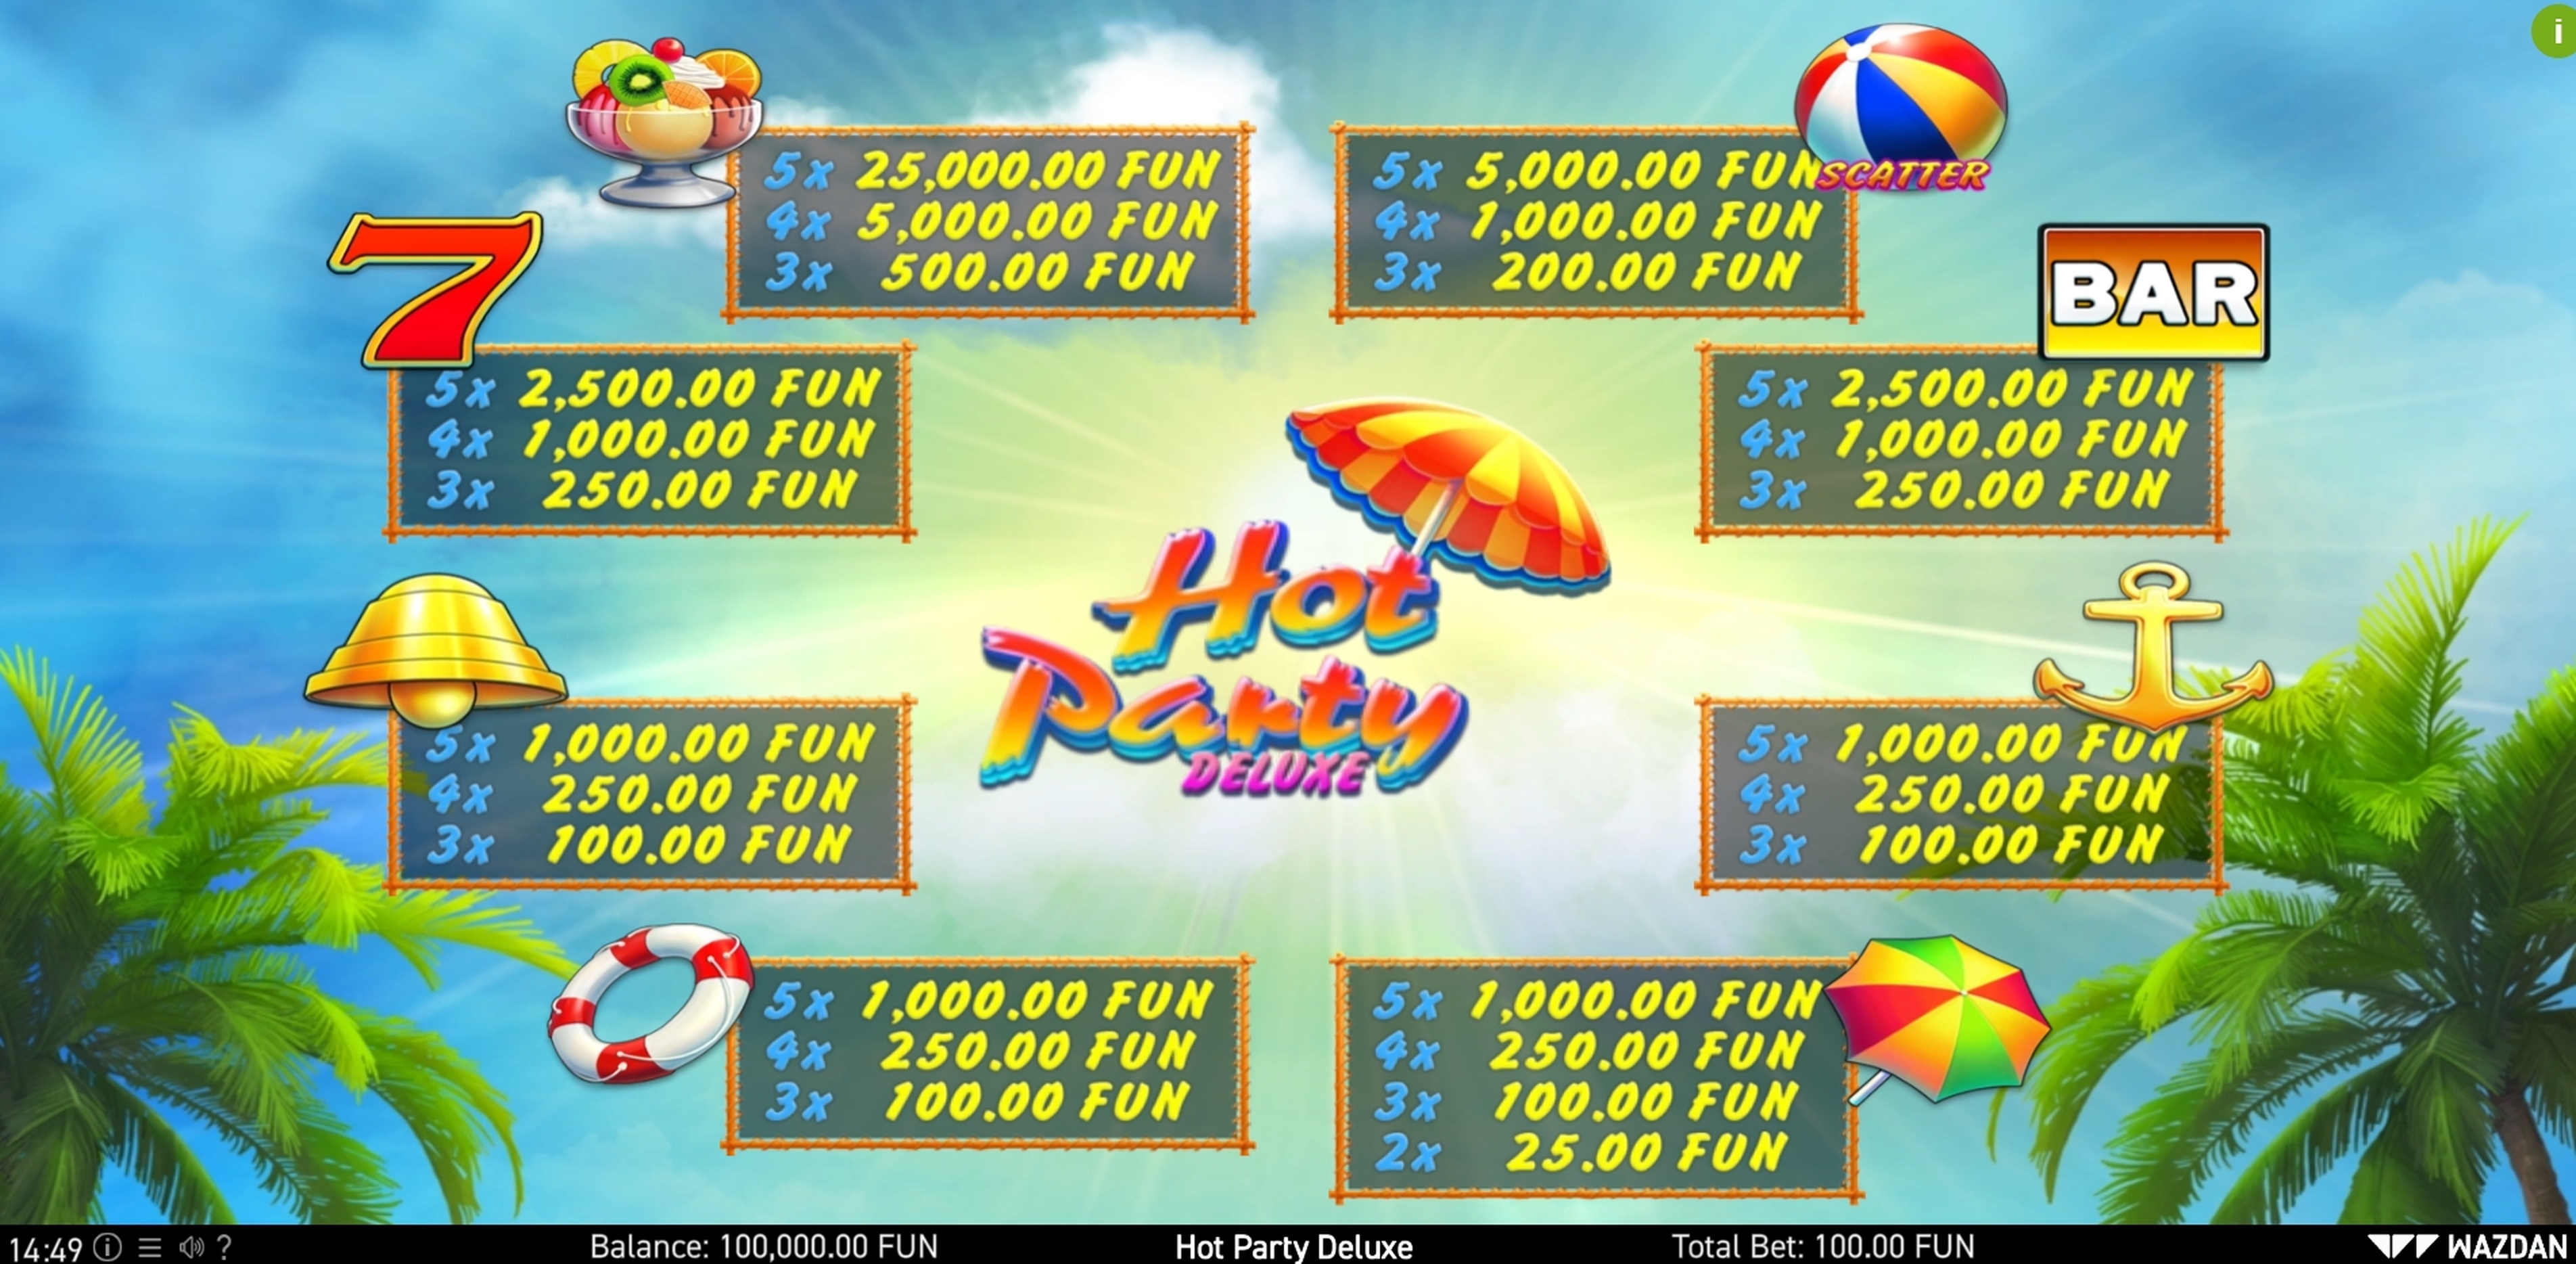 Info of Hot Party Deluxe Slot Game by Wazdan